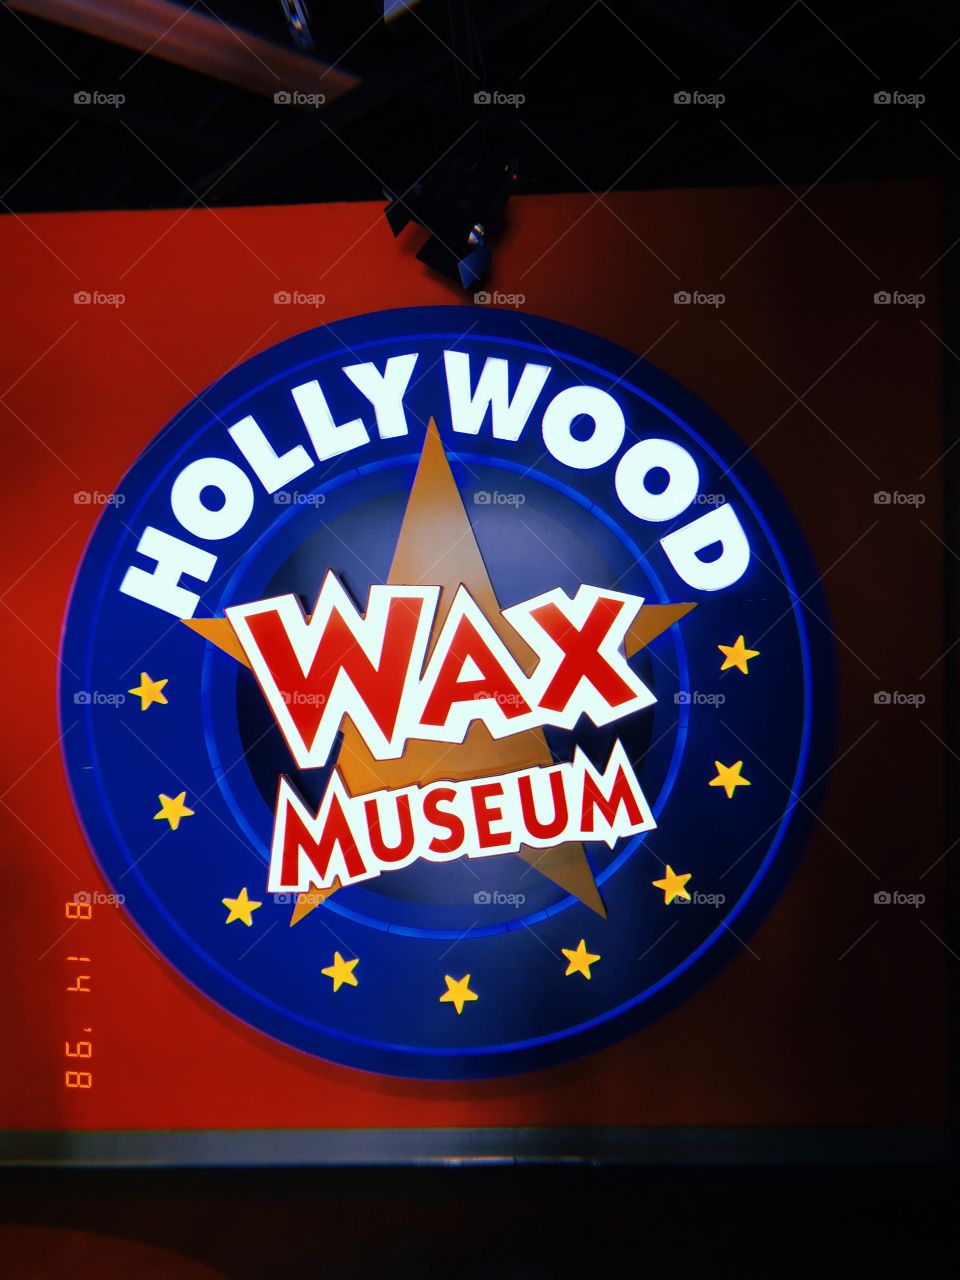 Hollywood wax museum